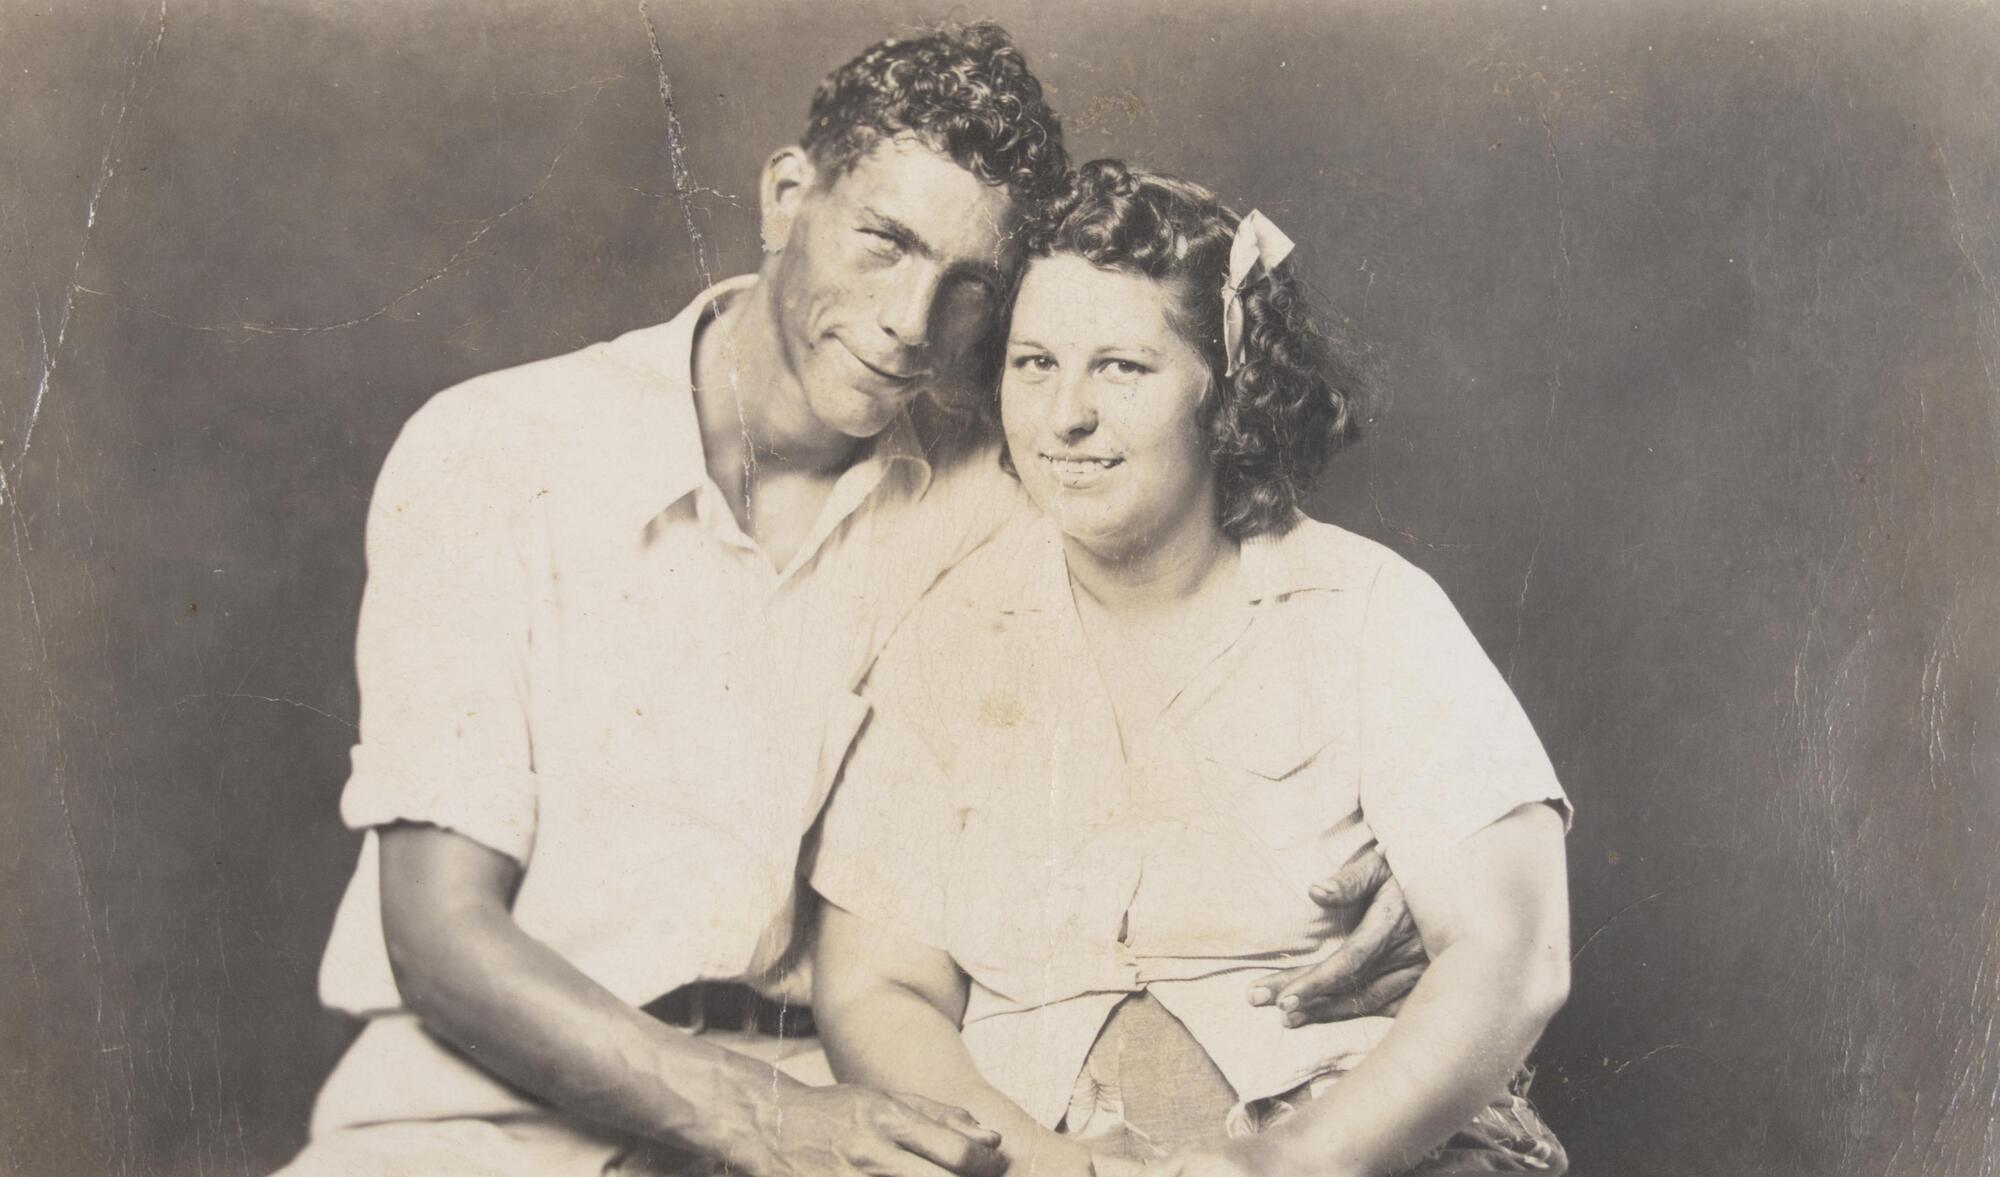 A portrait of a seated couple. A man sits on the left, his arm around a woman to the right. She wears a ribbon in her hair. Both wear light-colored, short-sleeved shirts.